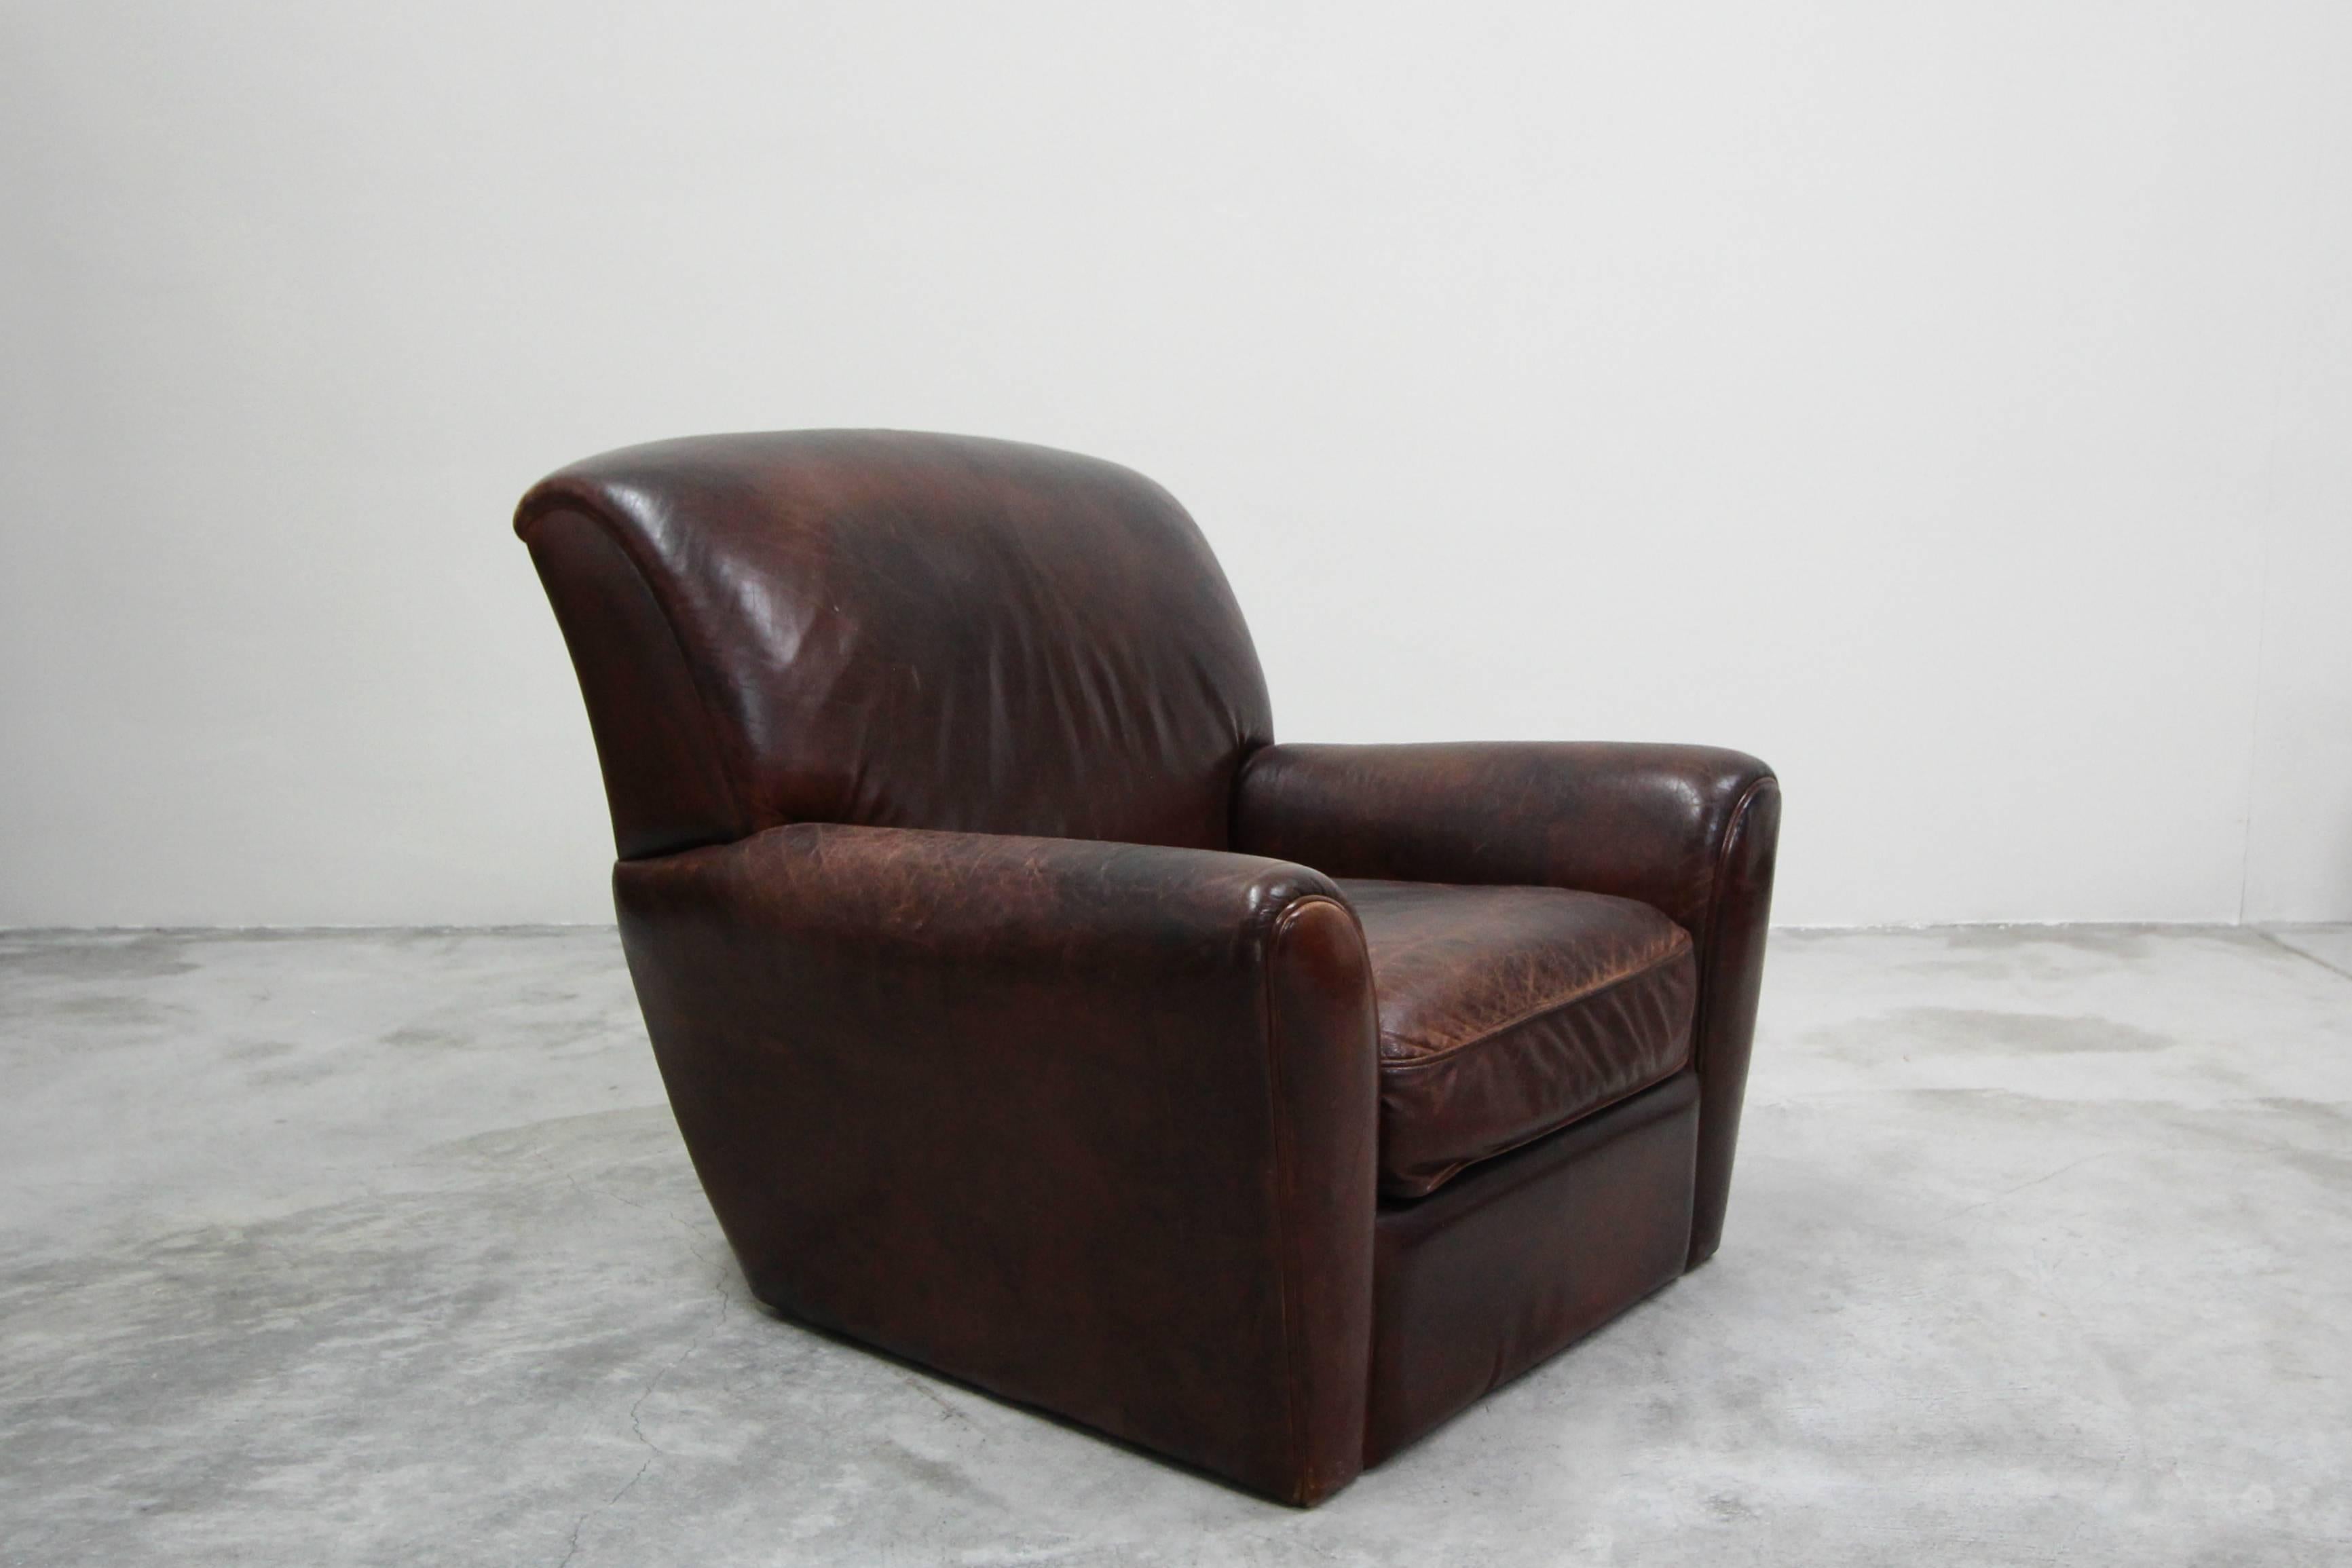 This is the ultimate vintage leather club chair. This French style patinated leather club chair is the epitome of perfect worn leather chairs. This chair features the kind of patina that money can't buy, the kind that only comes with use over the